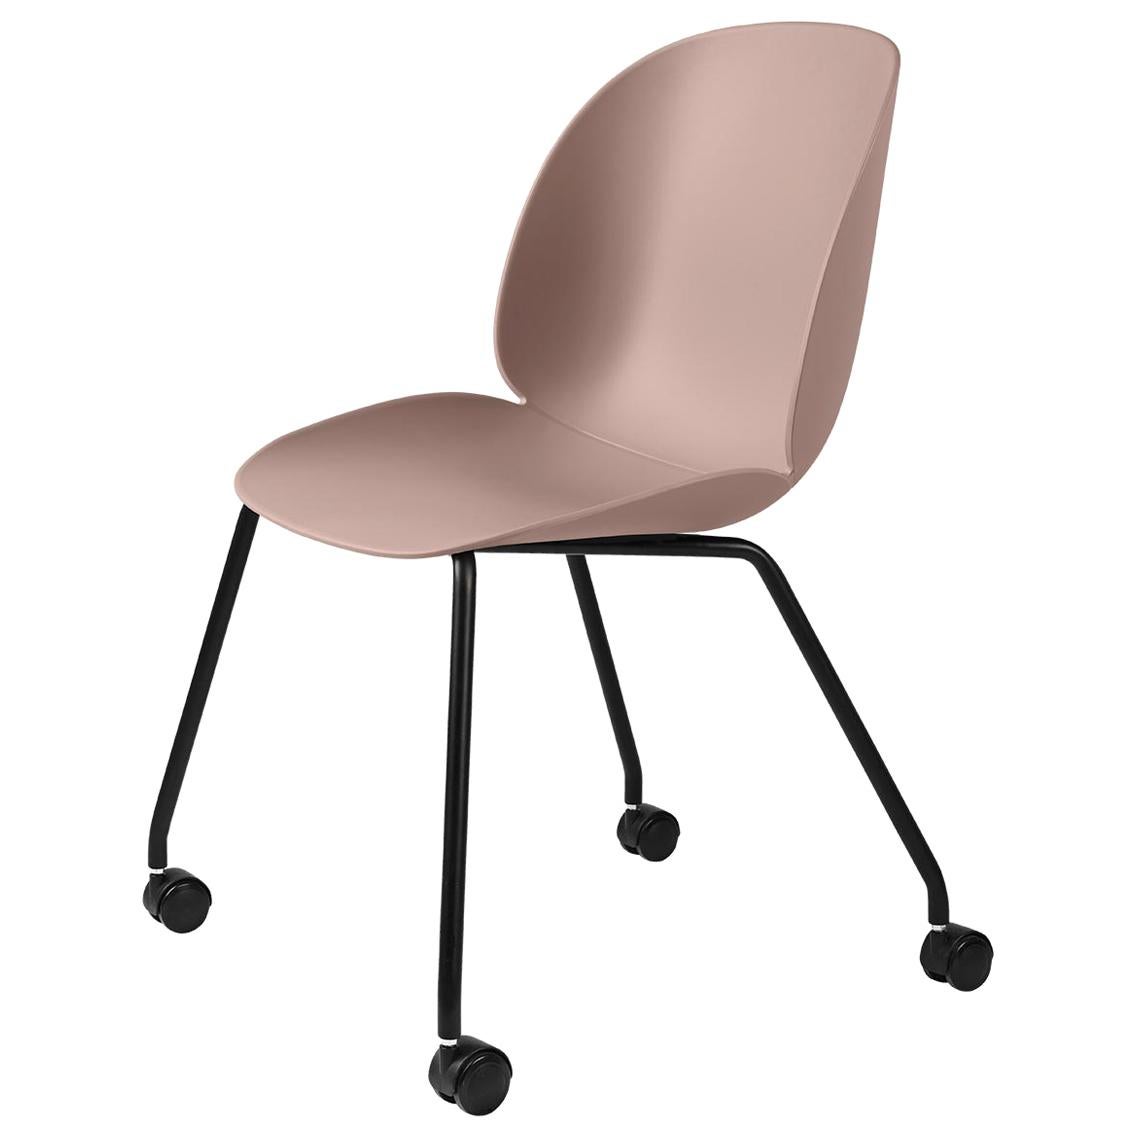 Beetle Meeting Chair, Un-Upholstered, 4 Legs with Castors For Sale